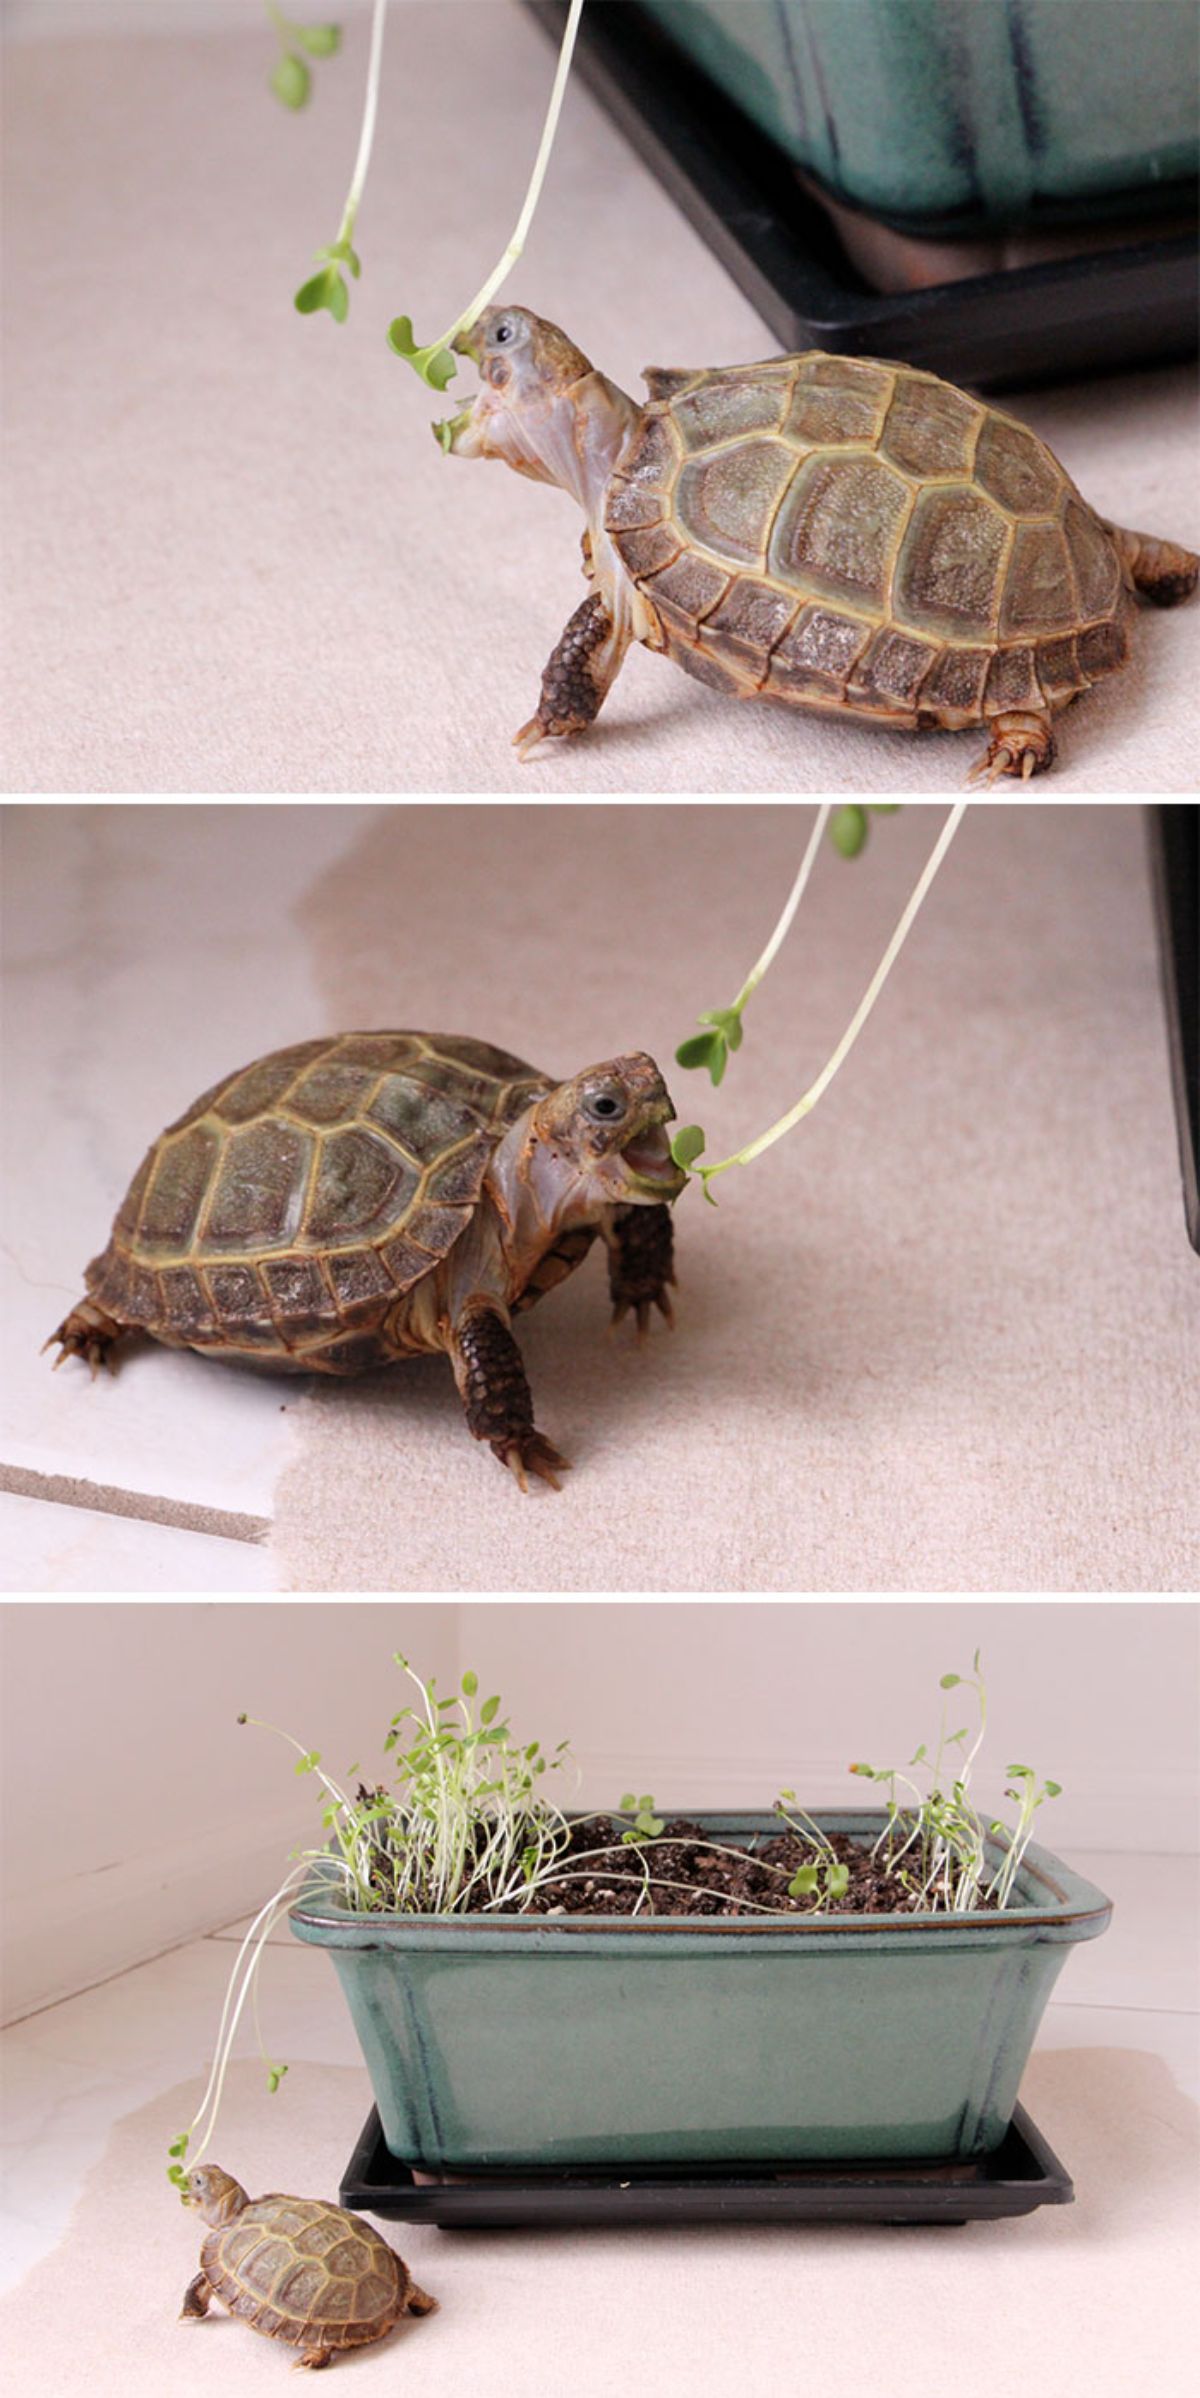 3 photos of a small turtle trying to eat the leaves of a small plant in a pot